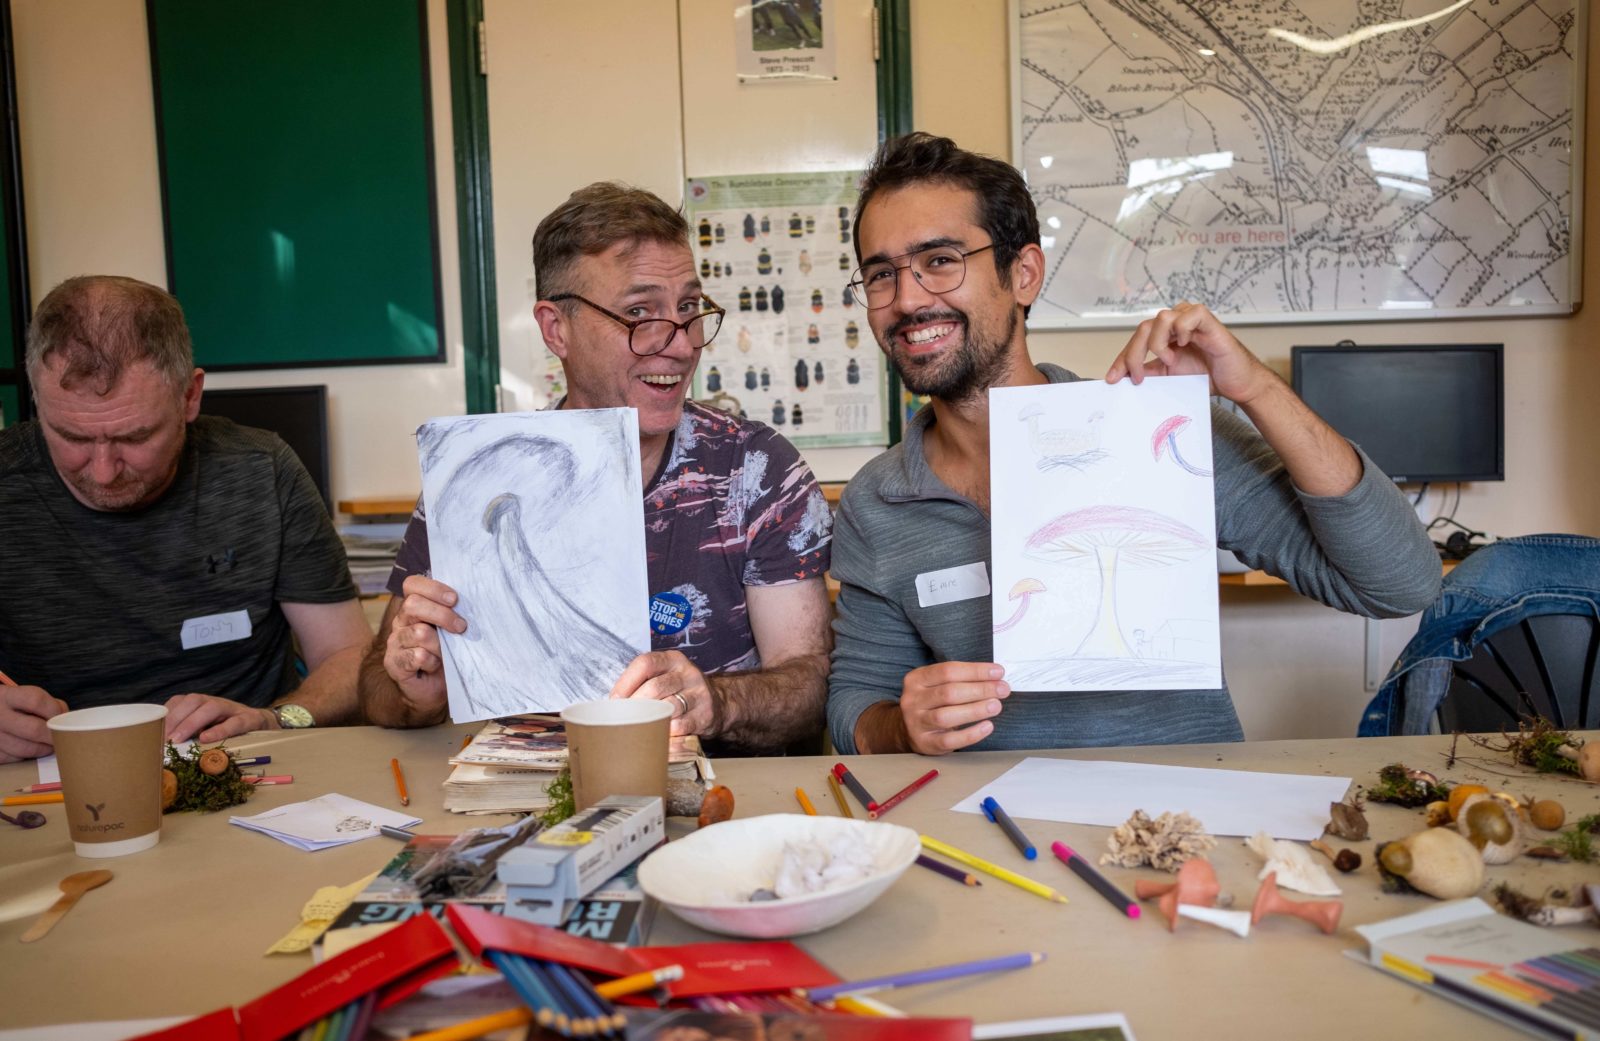 Two people sat at a table in the environment centre hold up their drawings of mushrooms for the camera whilst smiling.